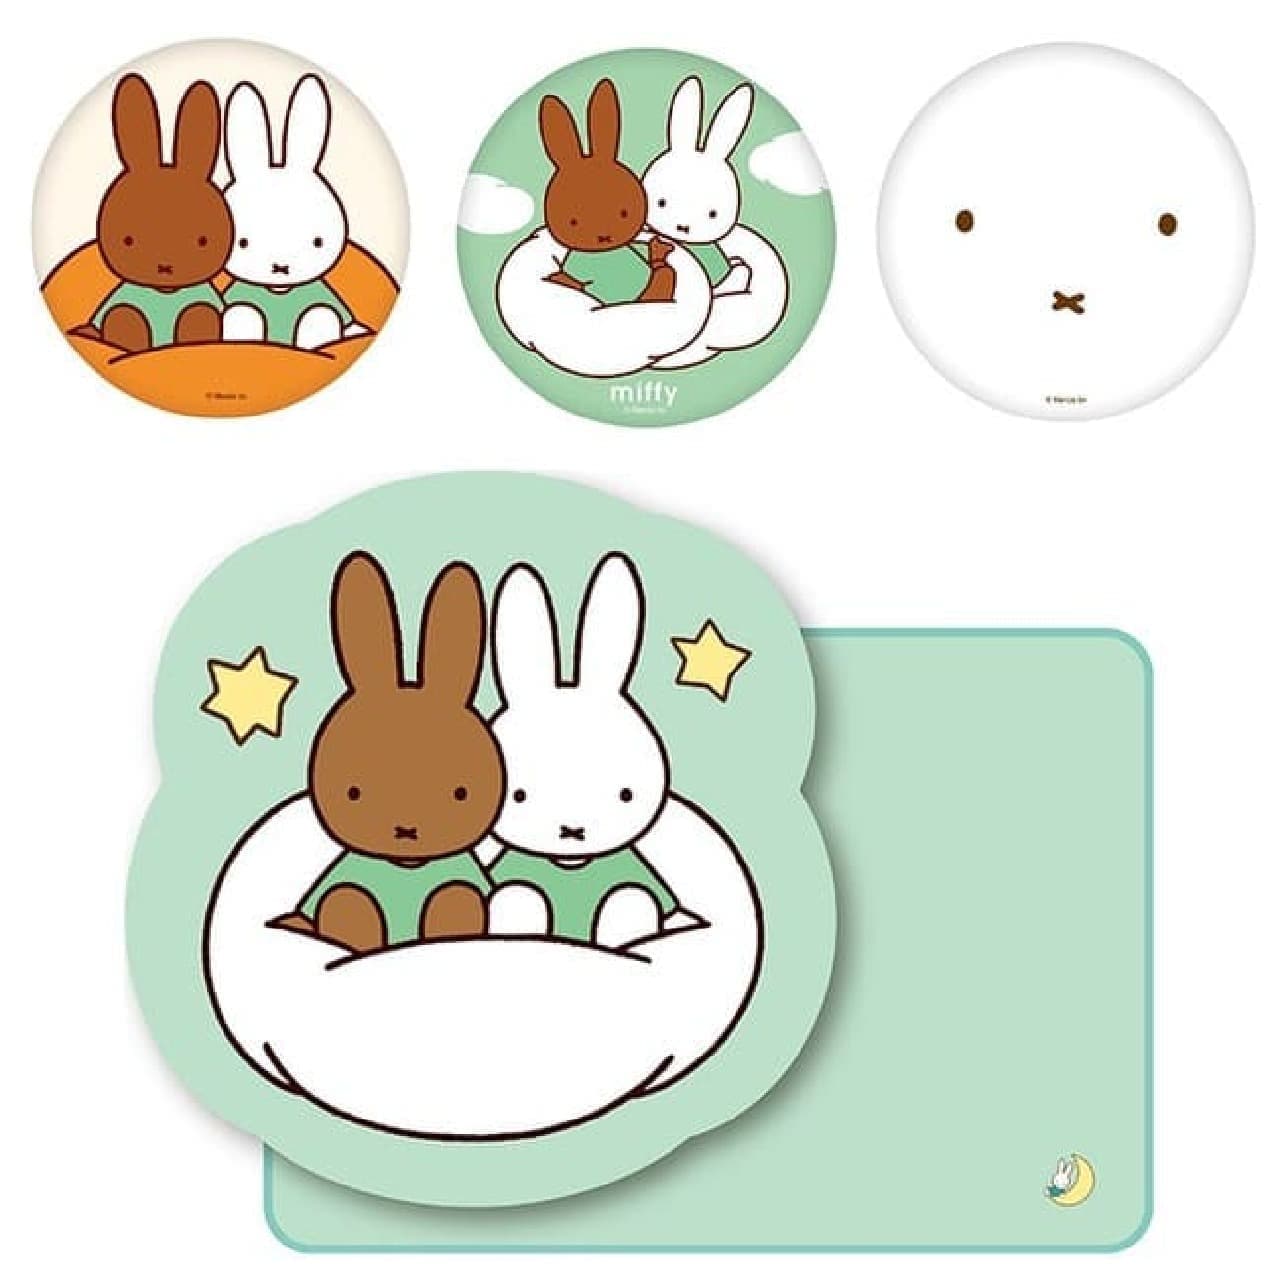 2022 new version "Miffy zakka Festa" at Seibu Ikebukuro main store --Event limited items and photo spots are now available! Purchase gifts